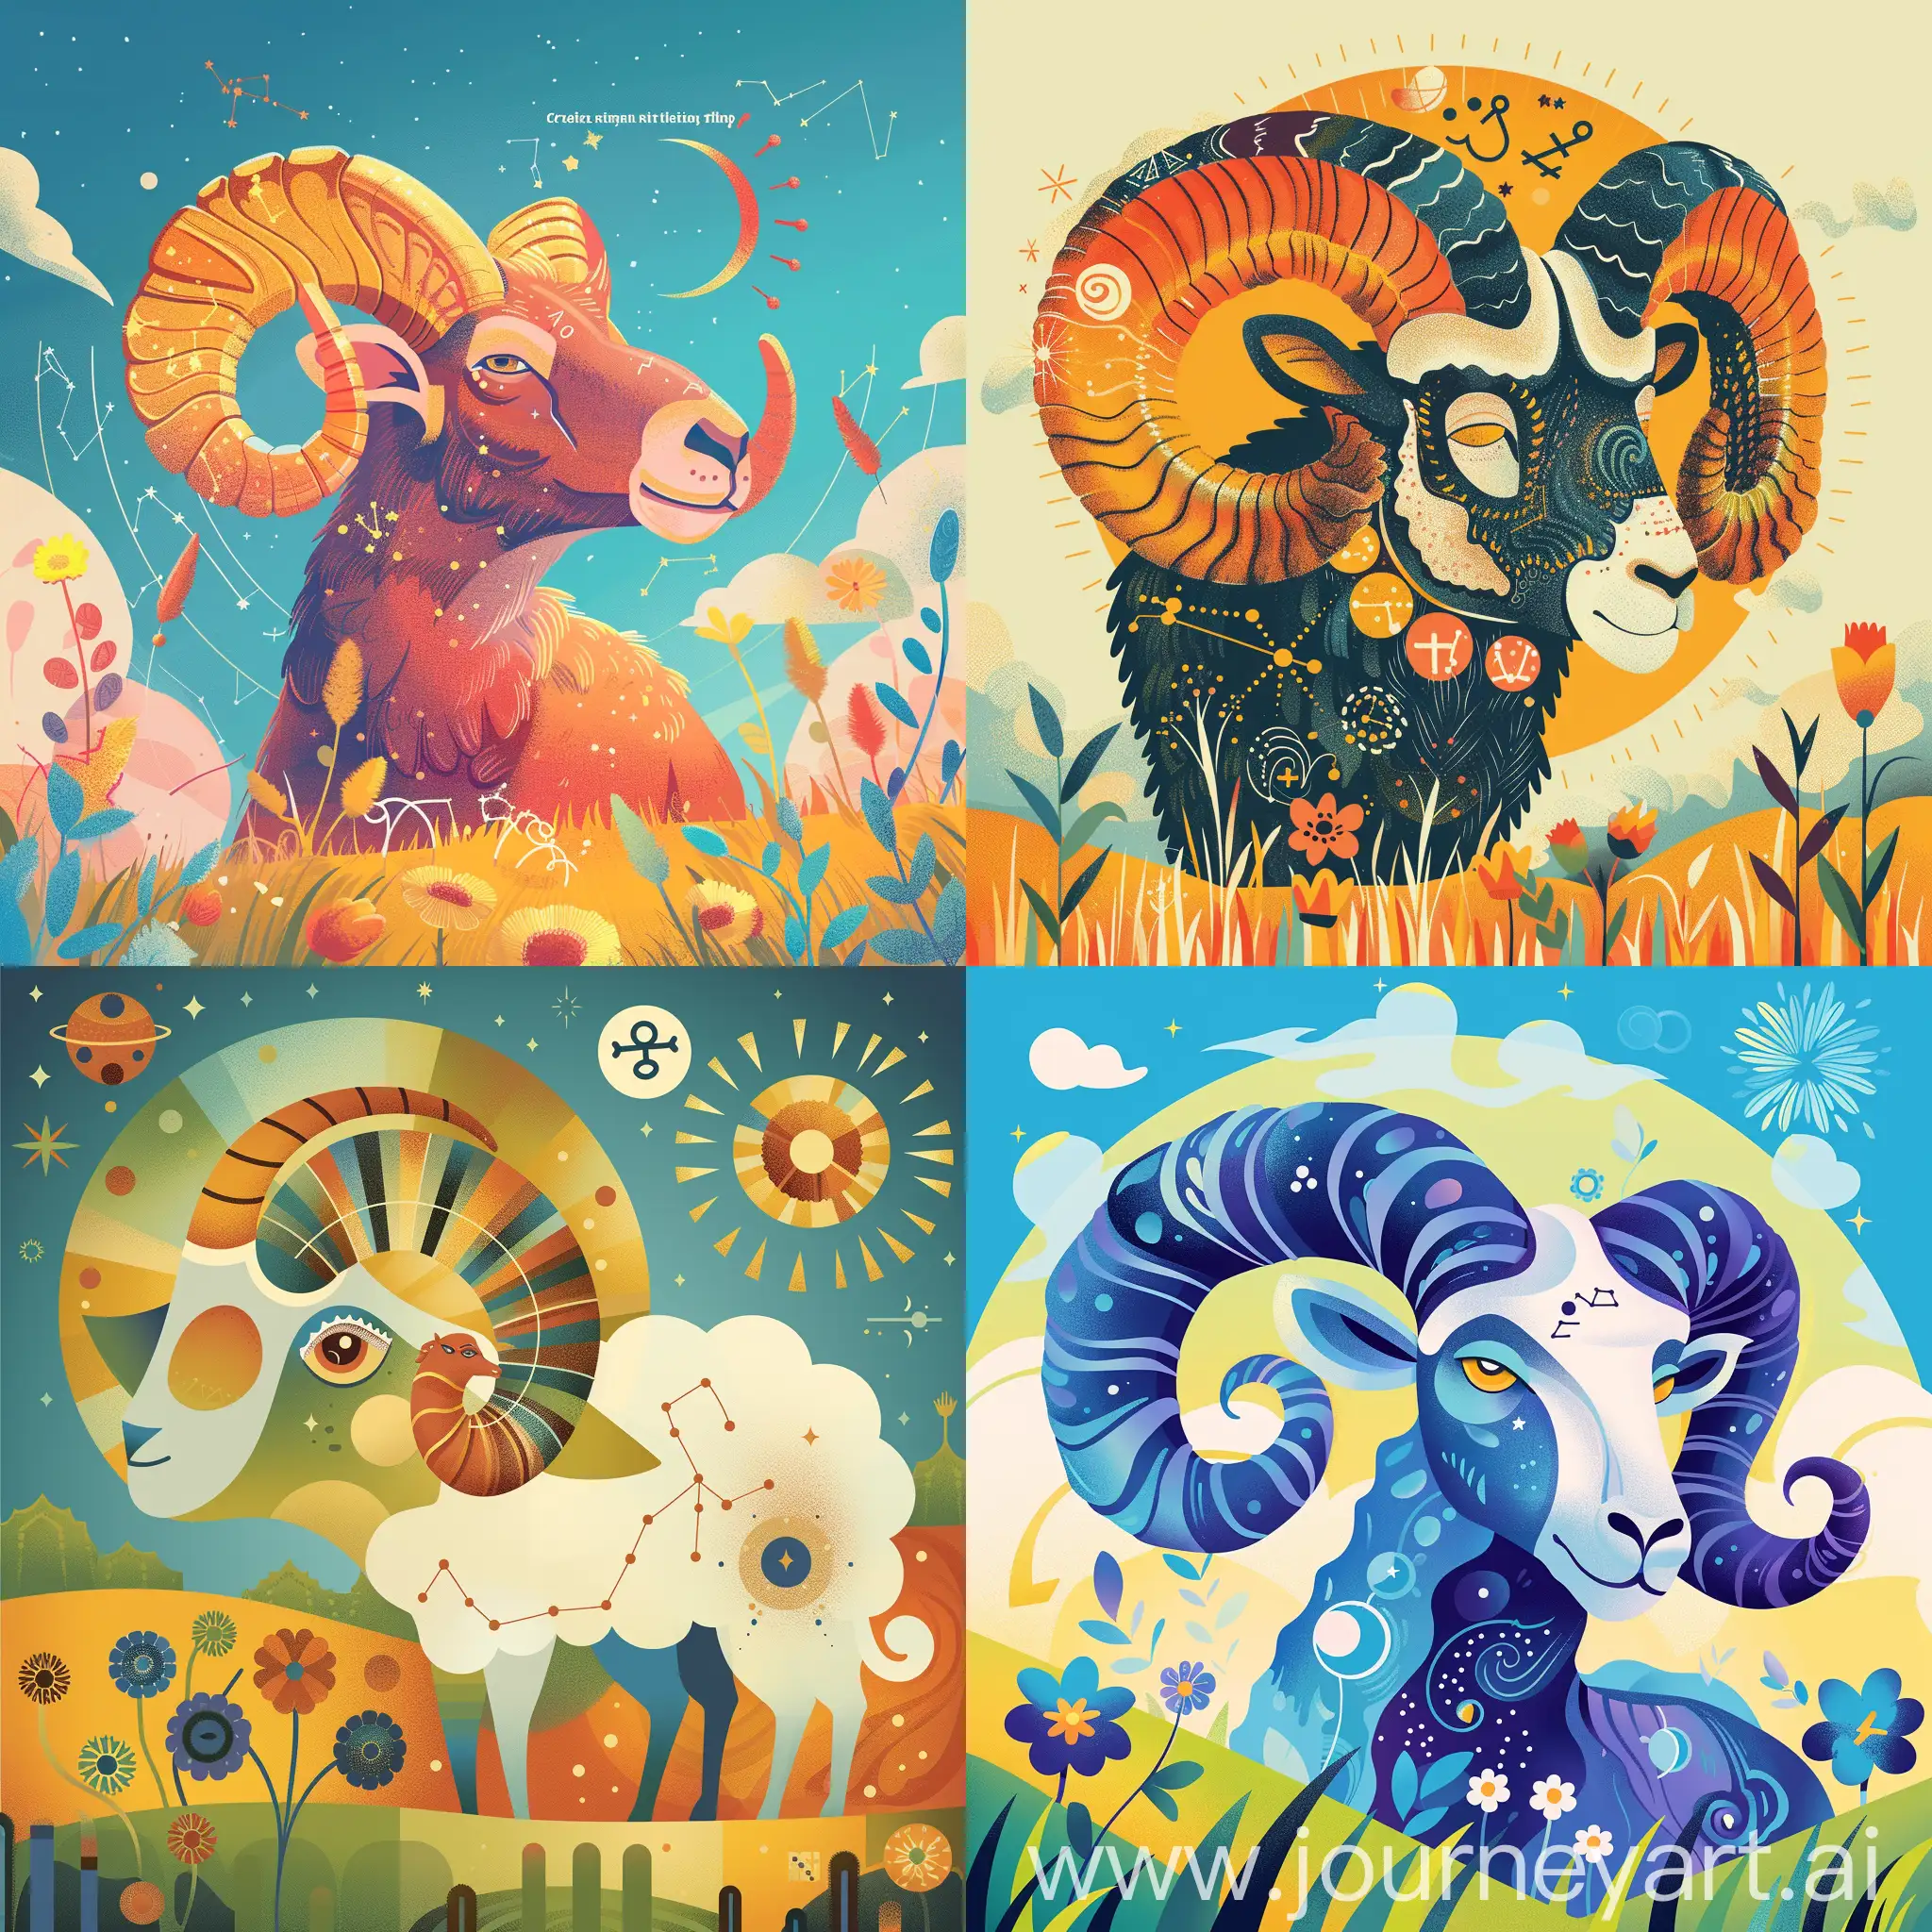 "Scorpio" The Ram in spring field create minimalistic, stylized illustration Focus the description on the unique traits and characteristics . For the illustrations, ensure they creatively embody the sign's essence, using elemental colors and subtly incorporating each sign's ruling planet or symbol. Design the backgrounds to reflect each sign's specific characteristics and element, adhering to a minimalistic style thatnminimalistic art style should aim to produce vivid, expressive, and thematic representations that resonate with the astrological themes."